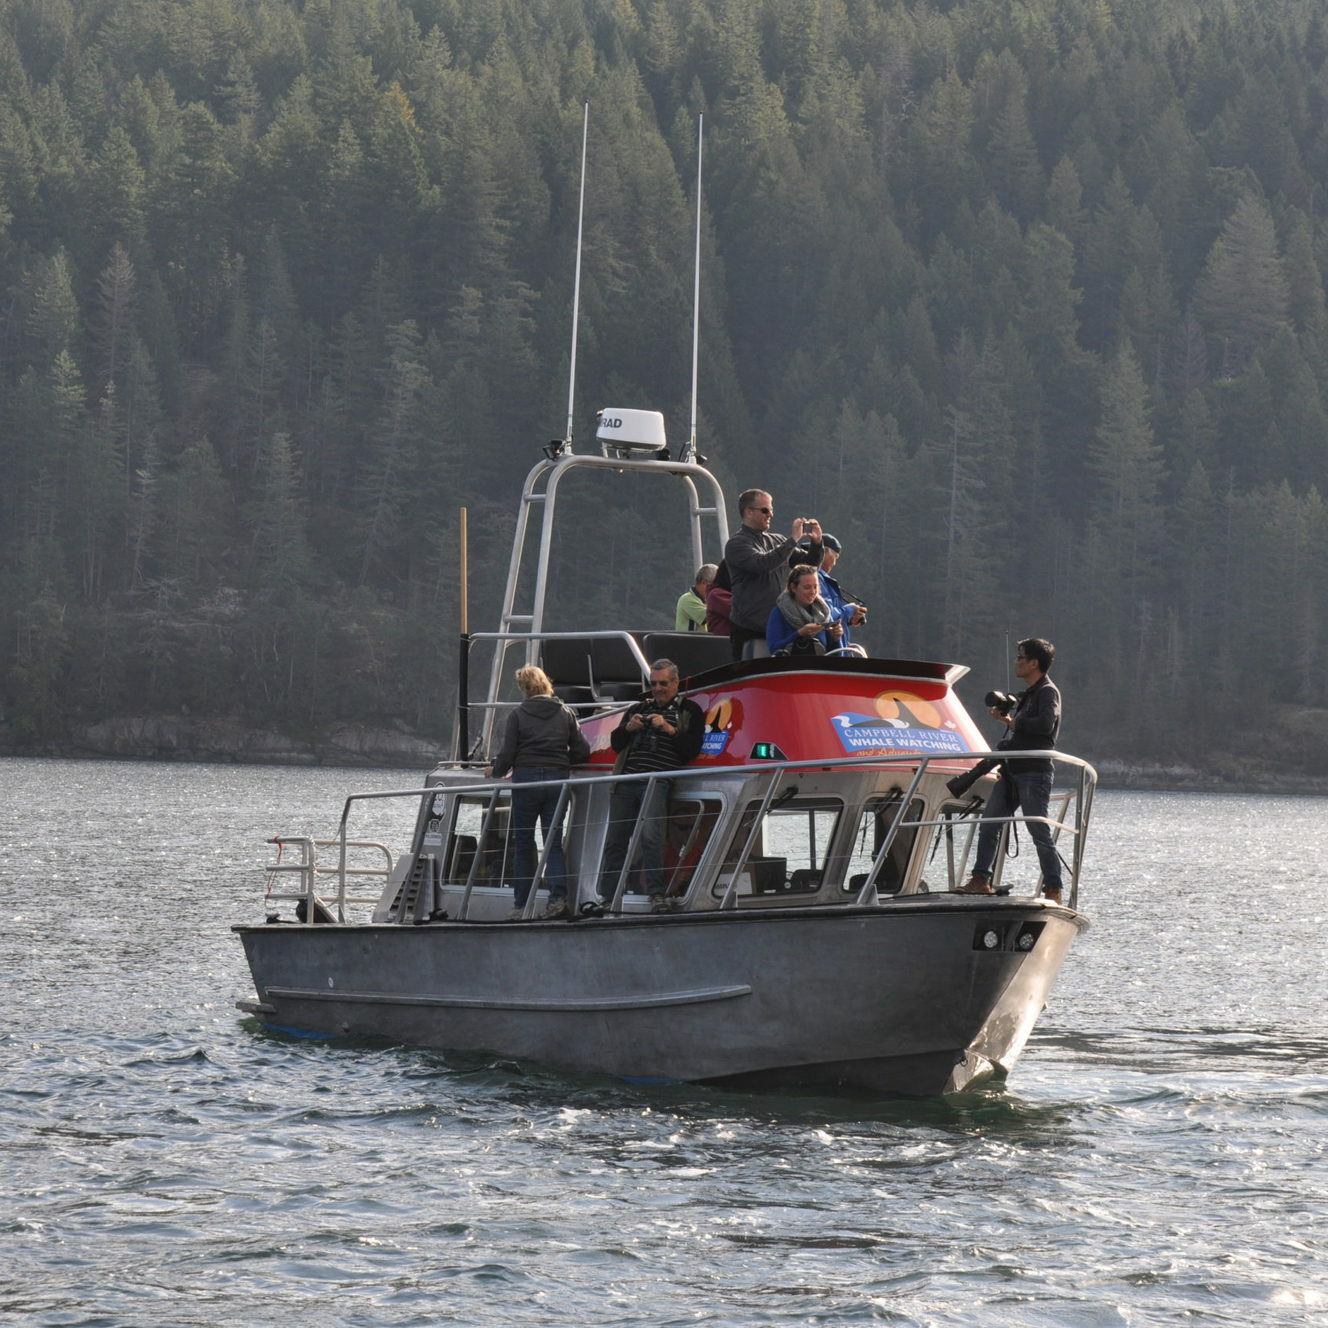 Covered Whale Watching Vessel with guests on board